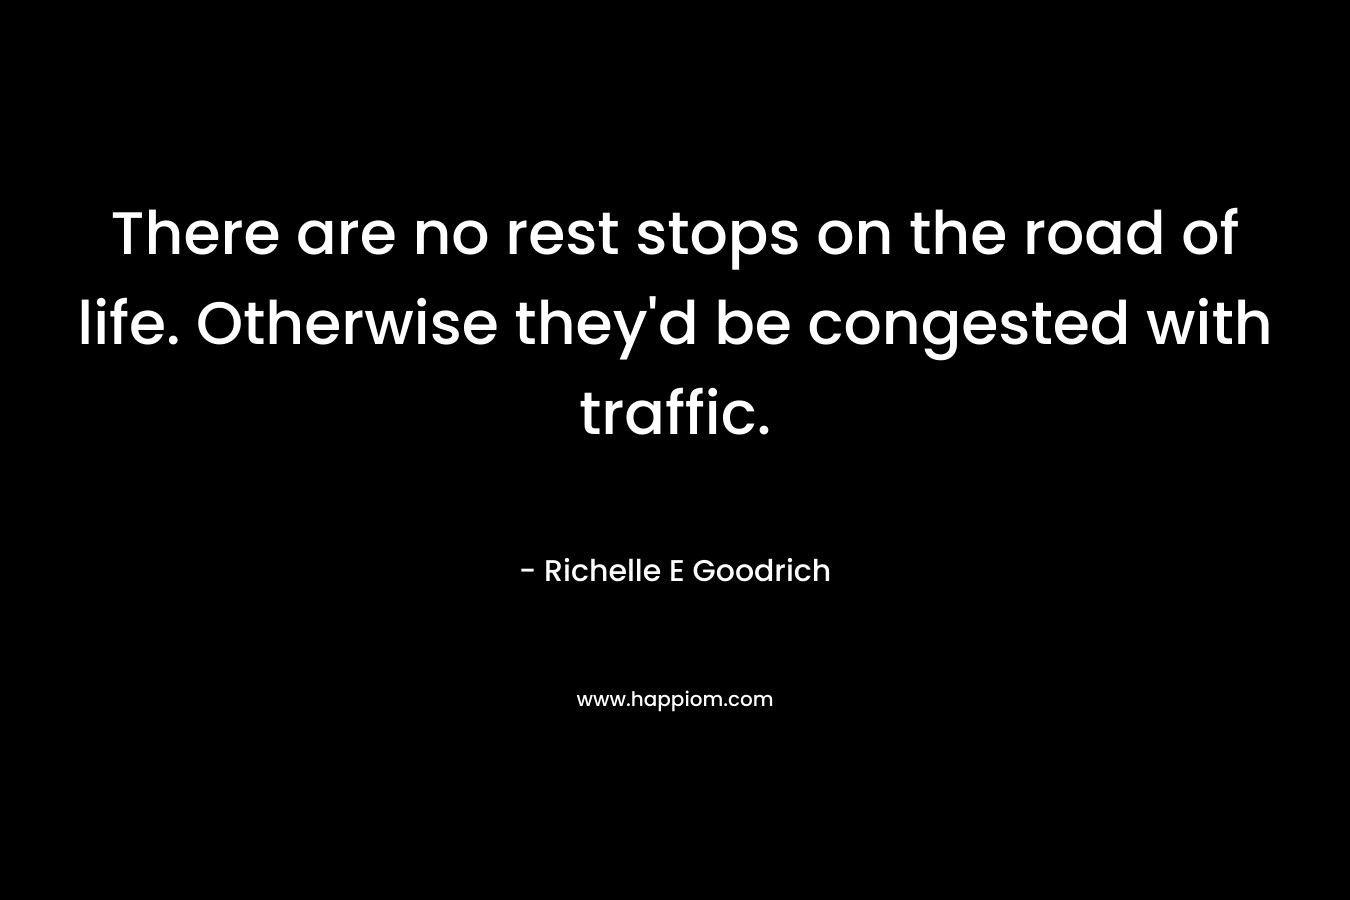 There are no rest stops on the road of life. Otherwise they'd be congested with traffic.